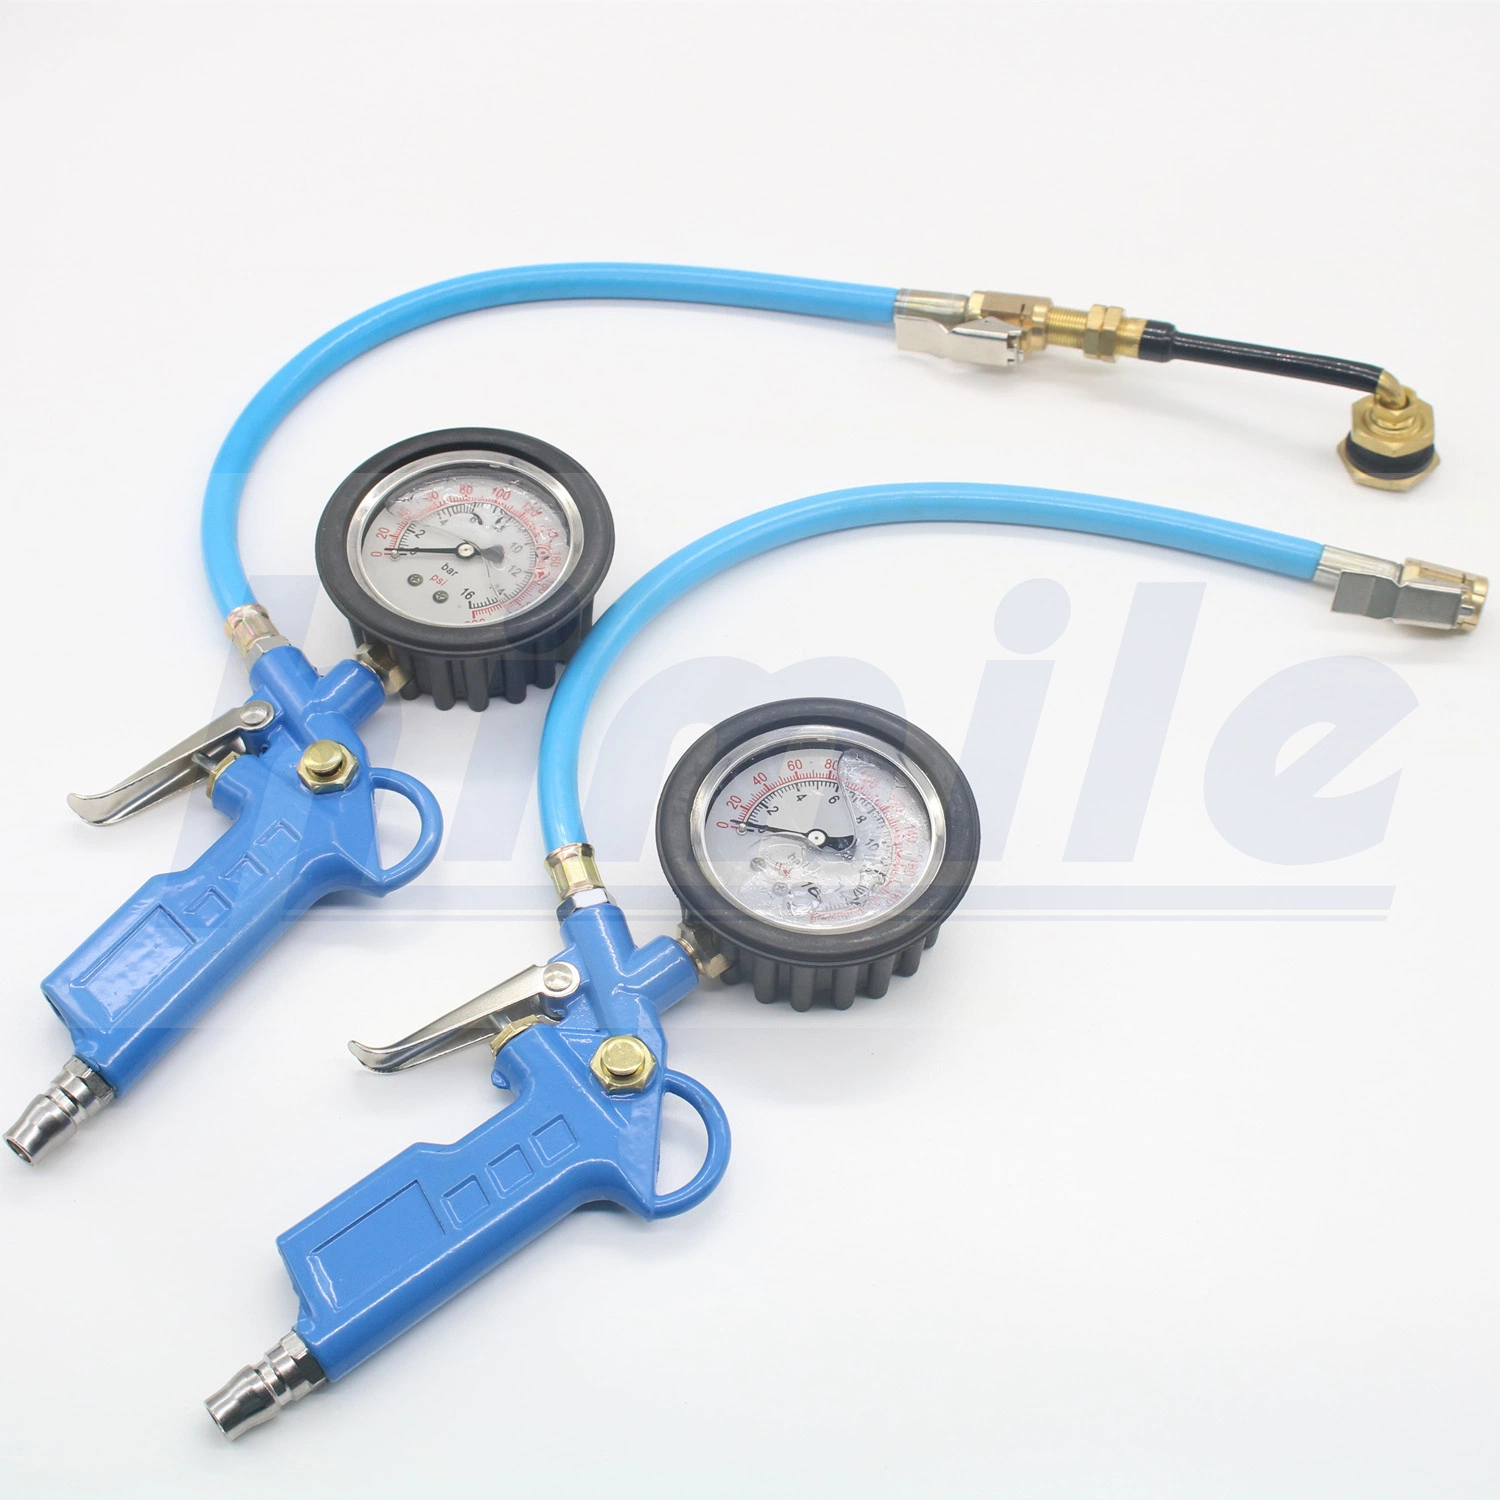 Himile High quality/High cost performance Tire Pressure Gauge, Accurately Test Tire Pressure and Auto Parts.